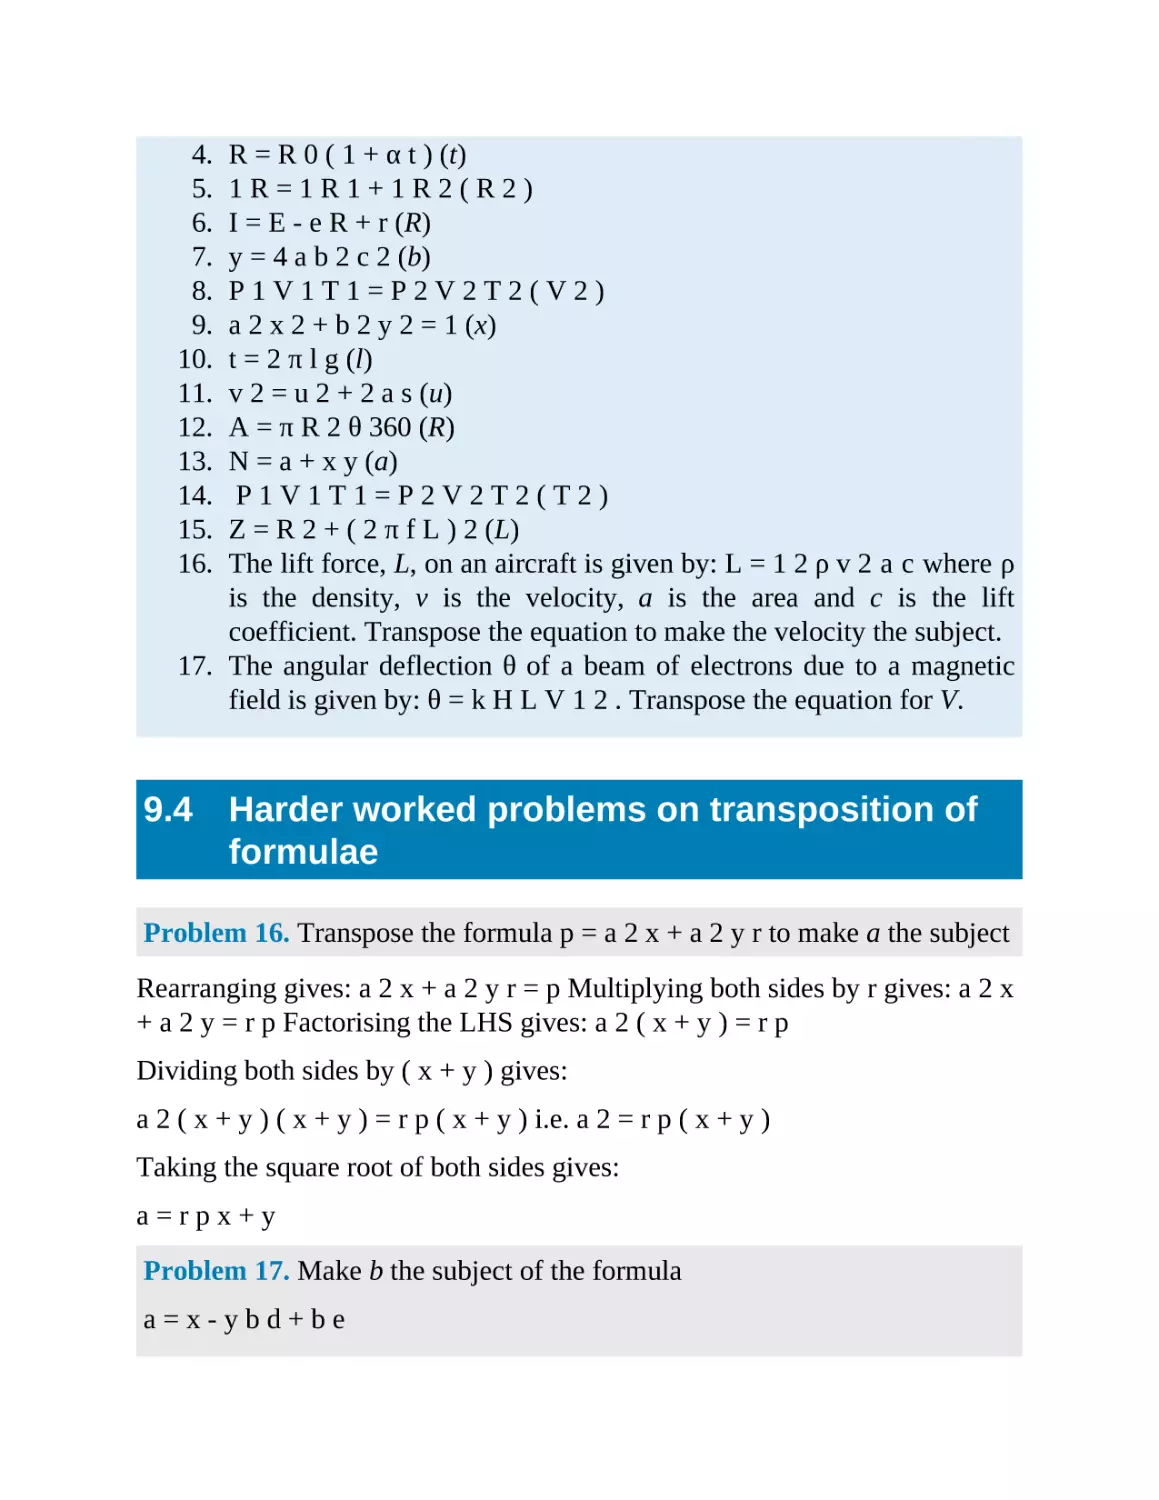 9.4 Harder worked problems on transposition of formulae